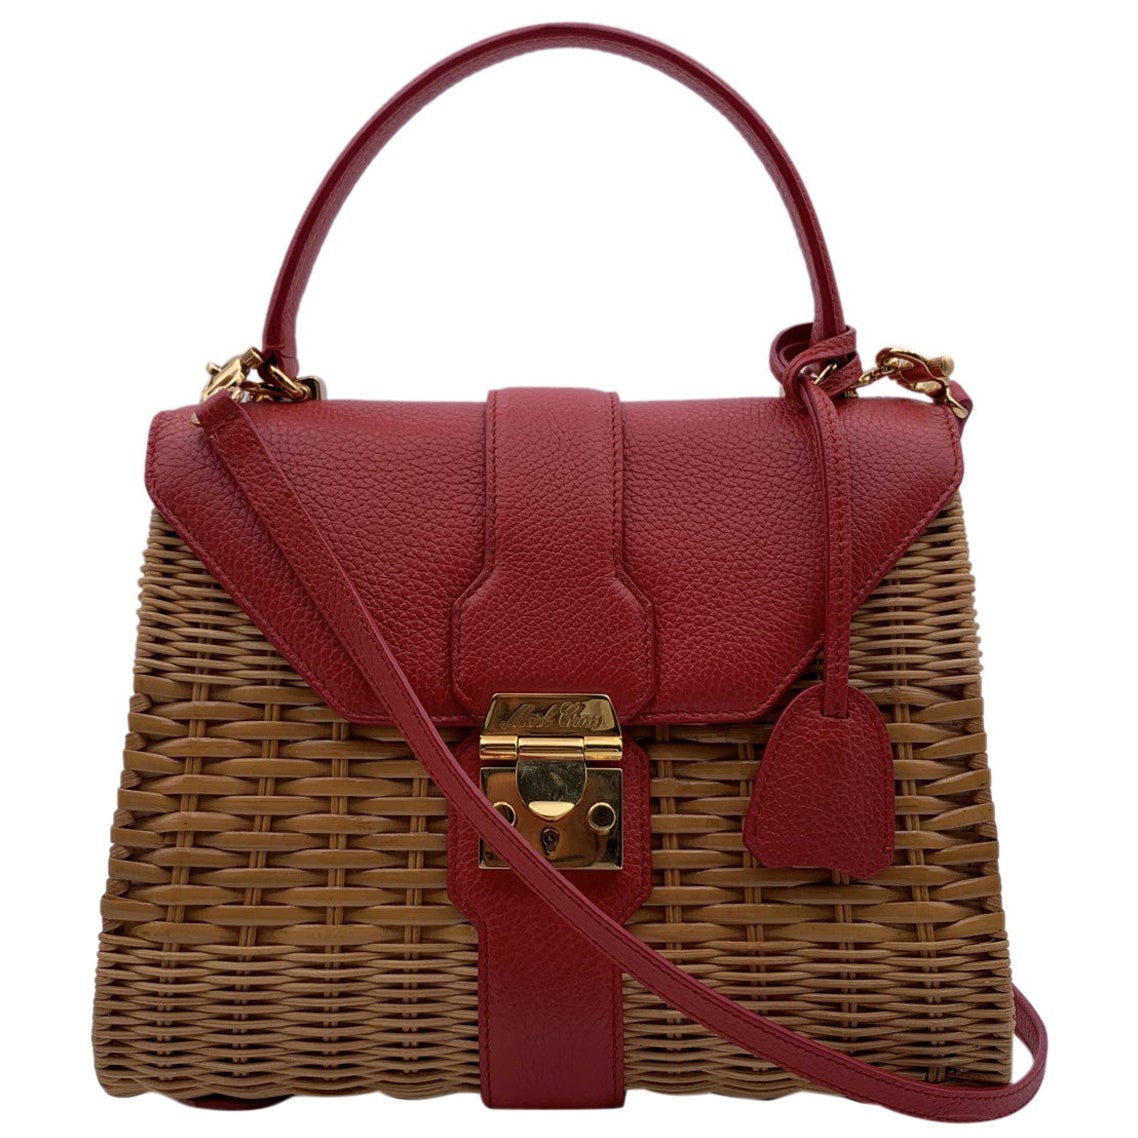 Mark Cross Wicker and Red Leather Satchel Handbag with Strap